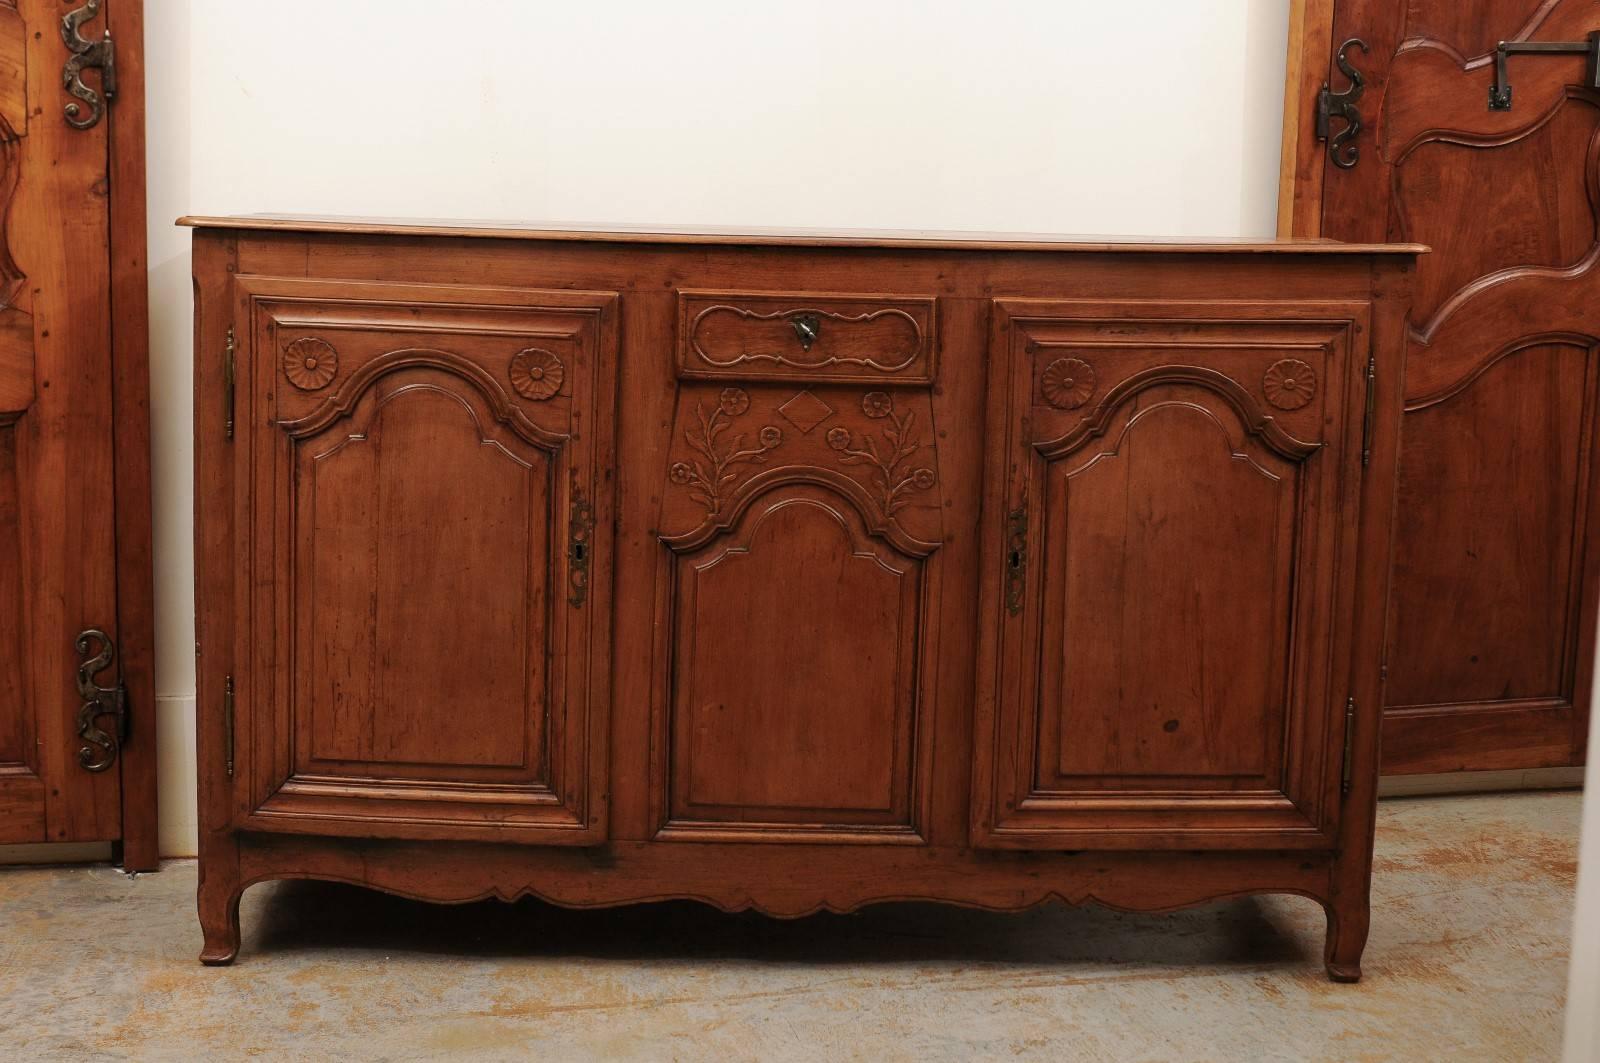 A French Louis XV style carved cherry enfilade from the Picardy region with single drawer and two doors from the late 18th century. This northern French long buffet features a rectangular planked top with rounded edges over a single drawer placed in